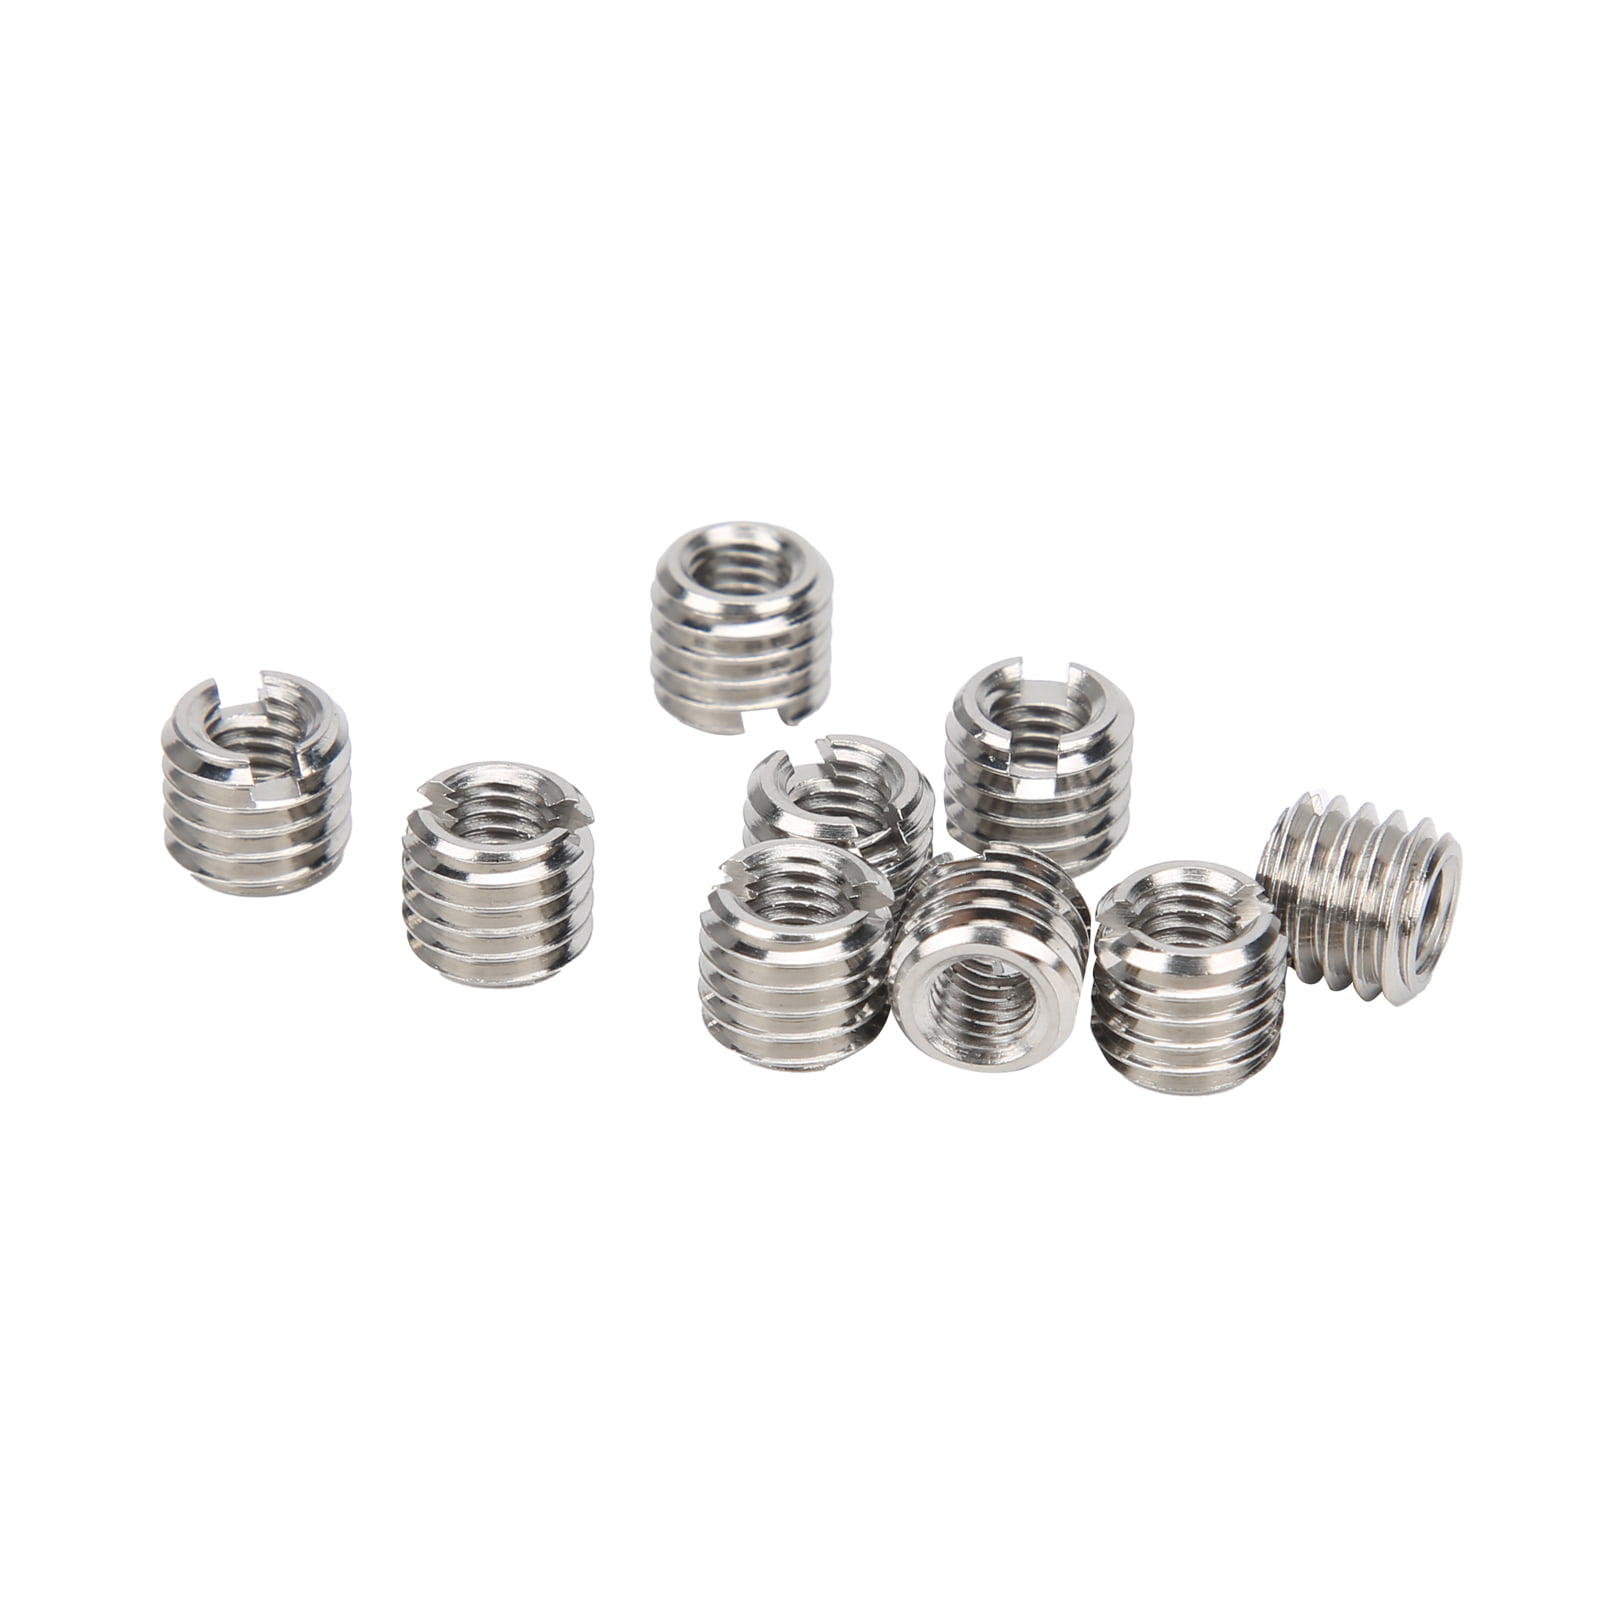 Thread Reducing Nut for Automobiles Aviation Thread Repair Tool Simple to Install Stainless Steel Thread Reducing Nut 